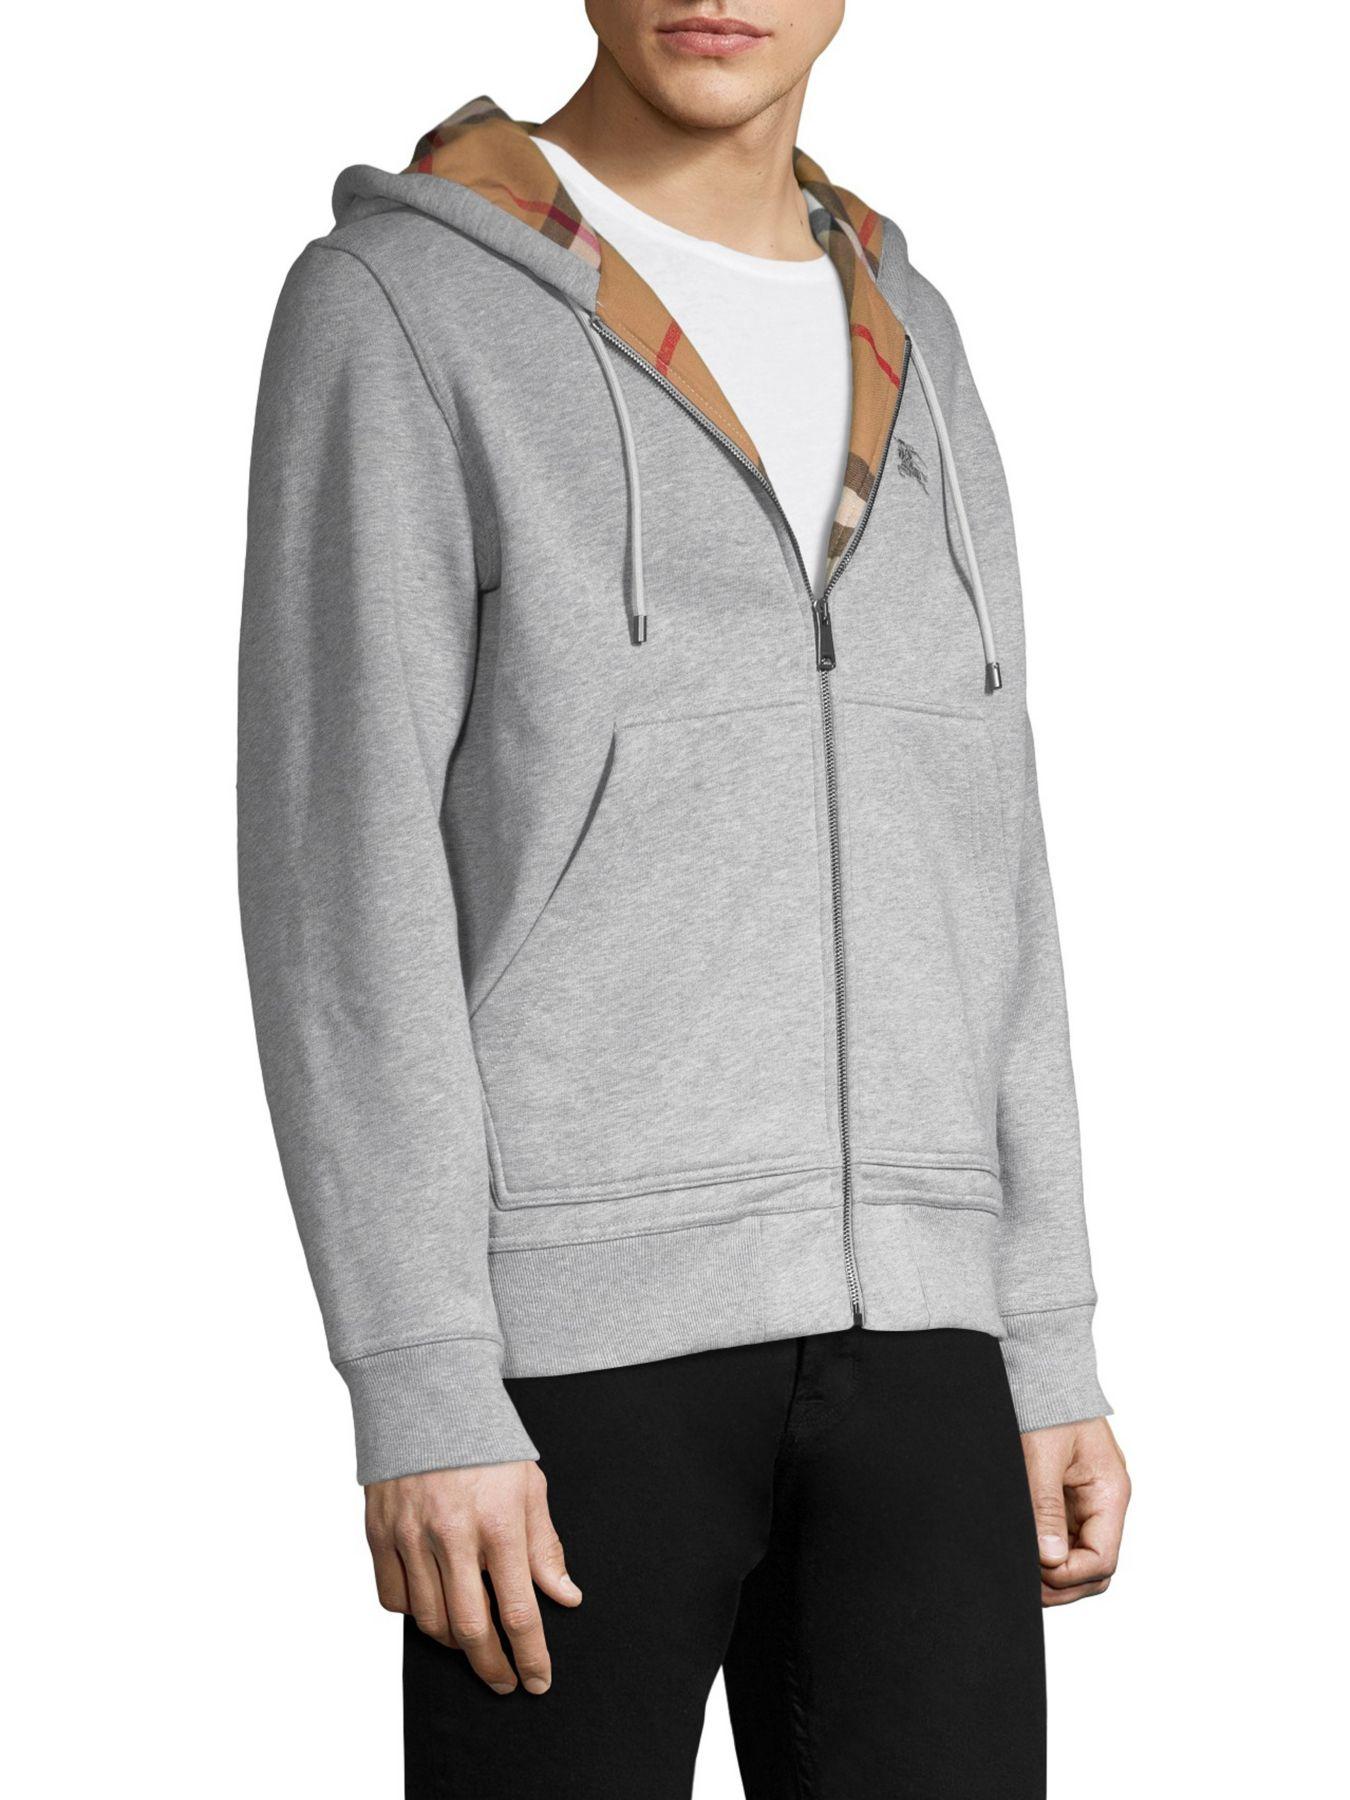 Burberry Cotton Fordson Heathered Hoodie in Grey (Gray) for Men - Lyst